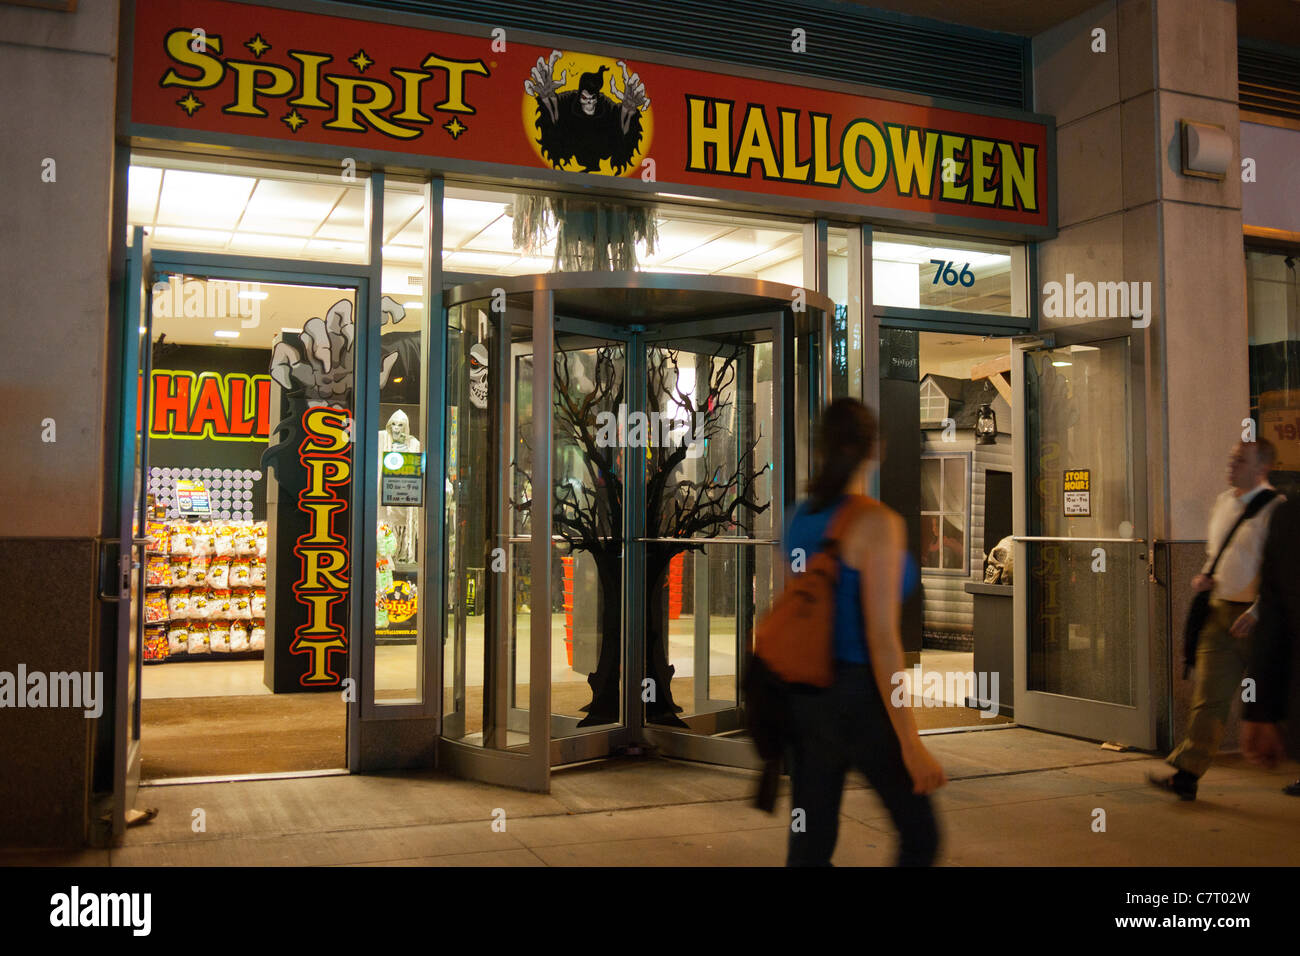 Halloween Store High Resolution Stock Photography and Images - Alamy